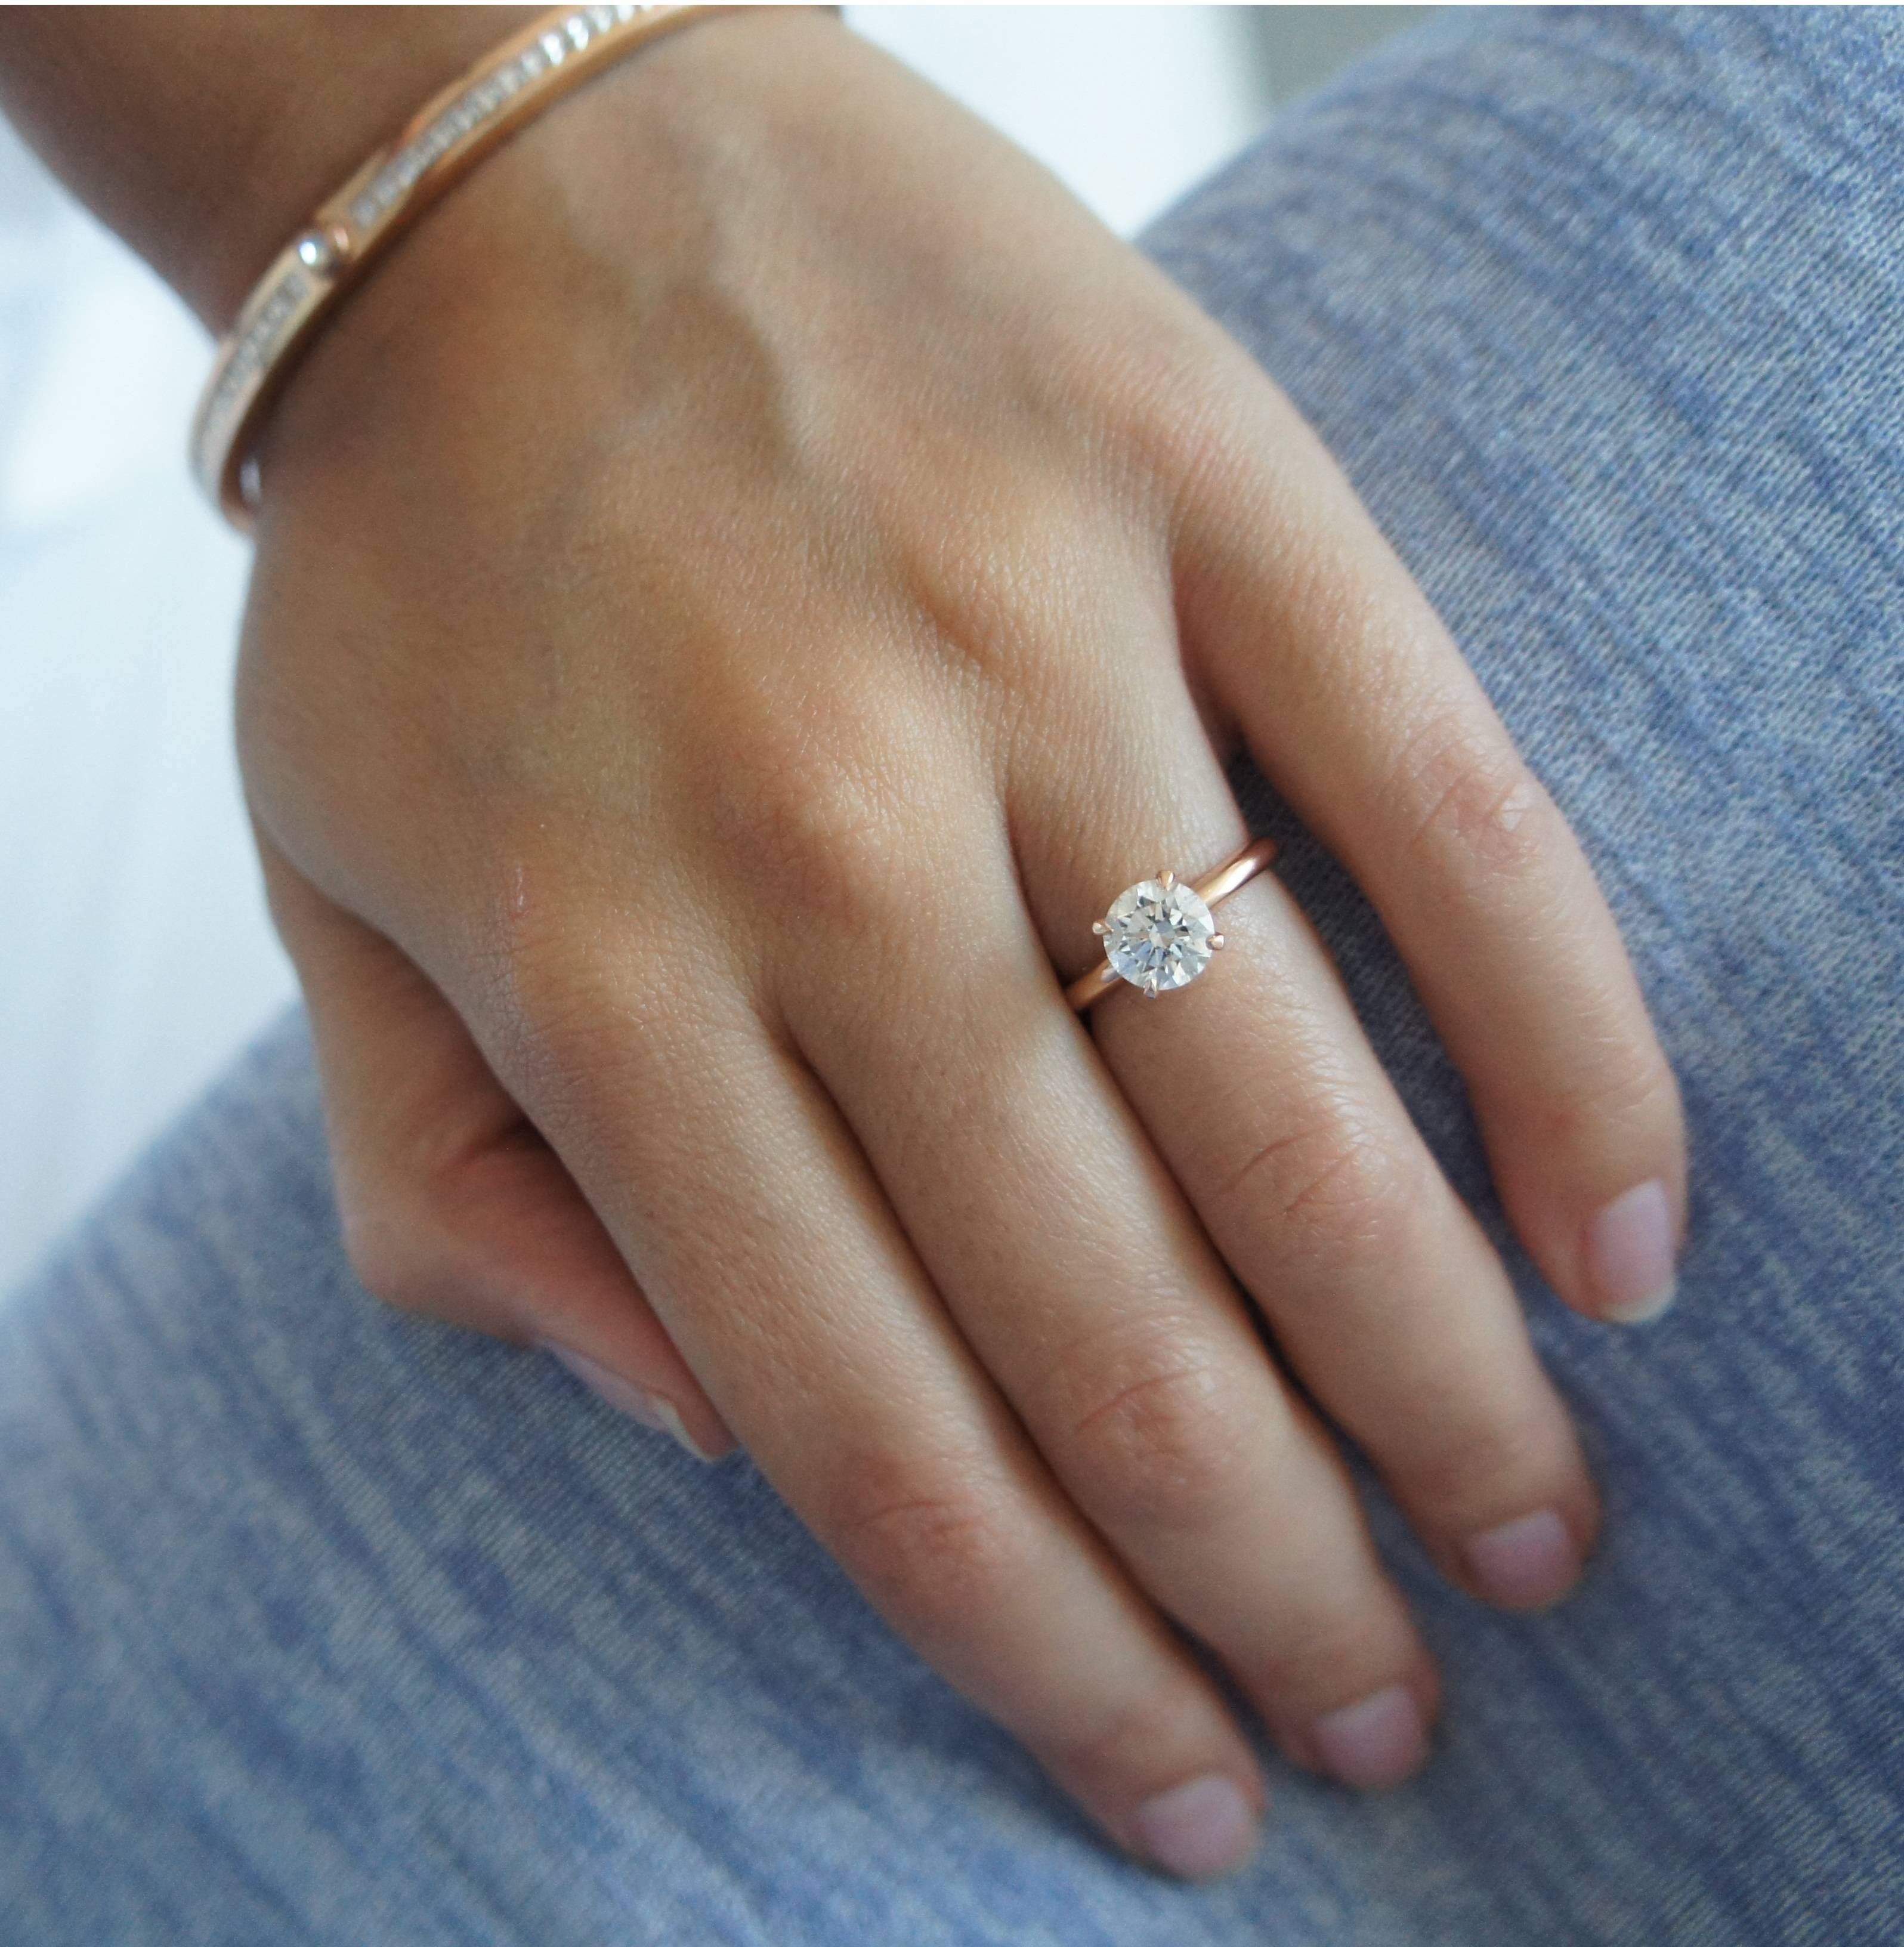 Rose Gold Solitaire Engagement Ring!! – Weddingbee For Weddingbee Engagement Rings (View 10 of 15)